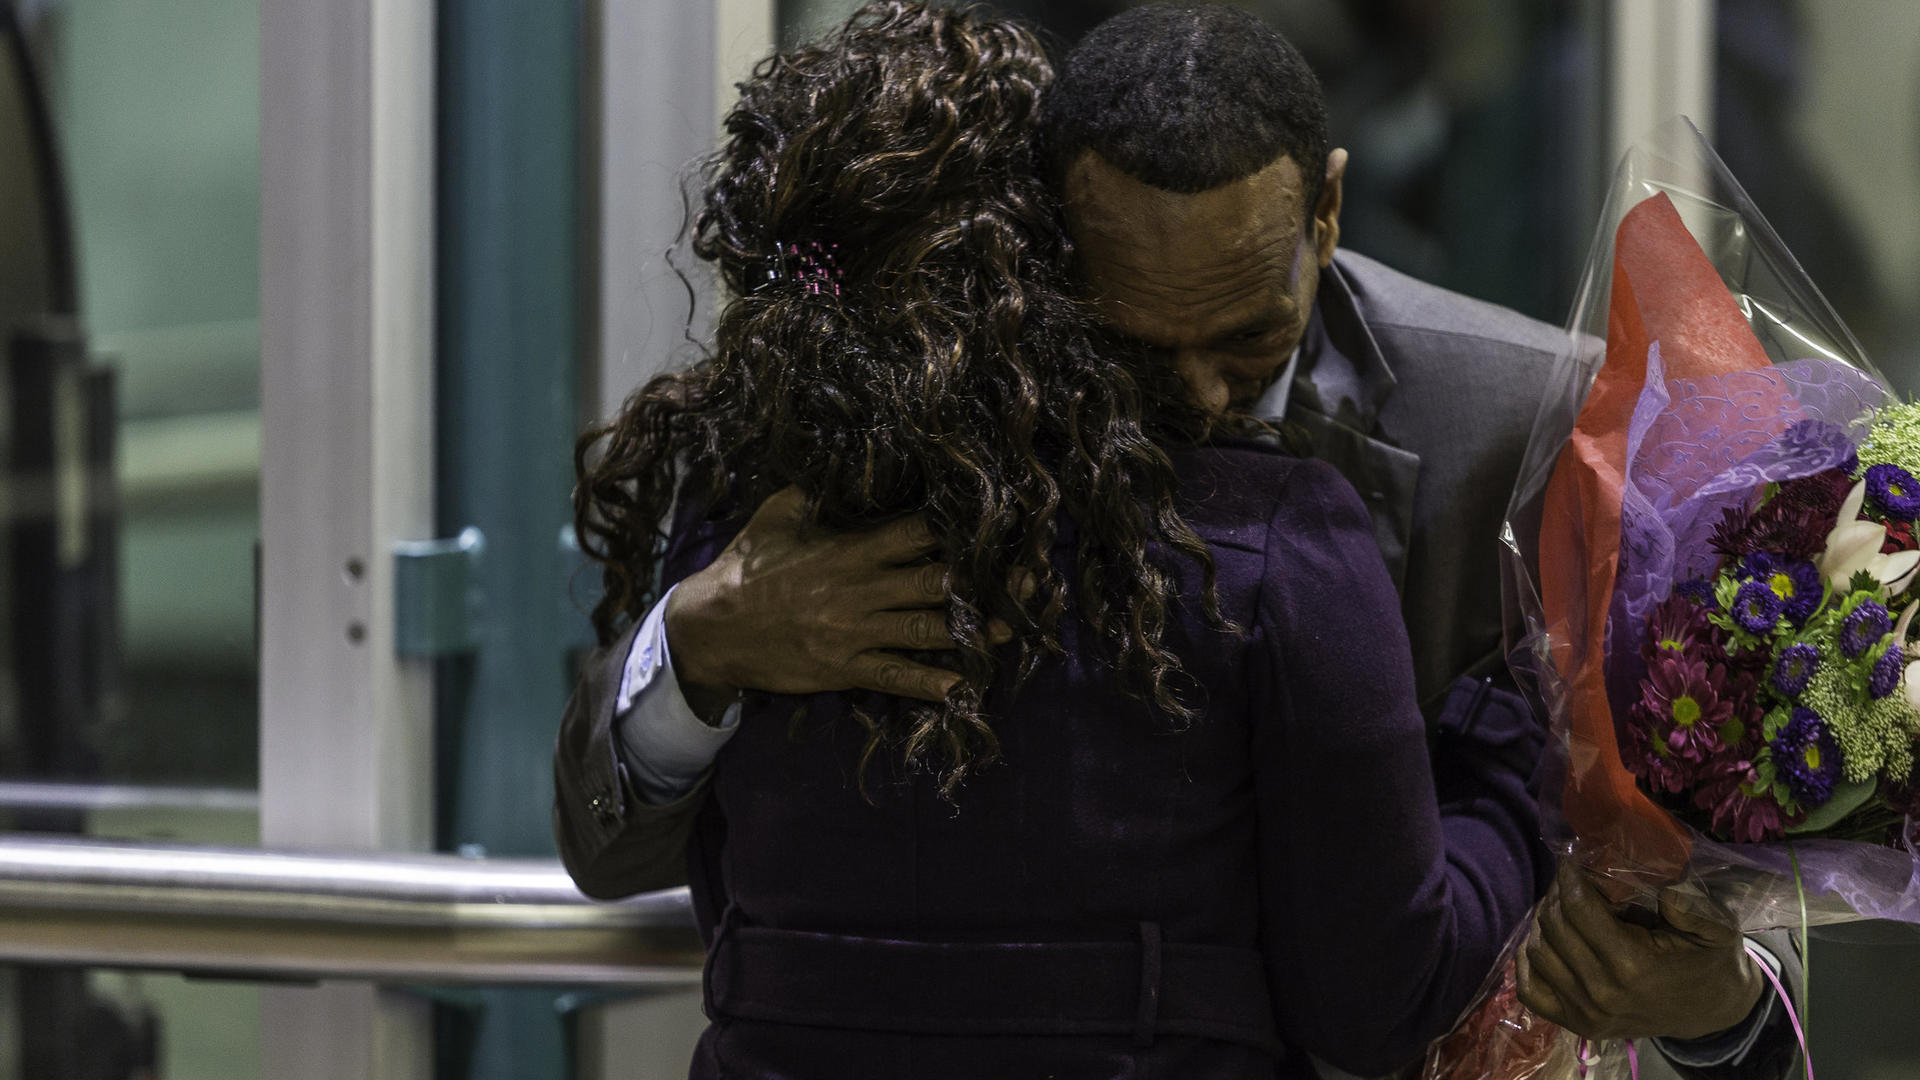 A father and daughter, Somali refugees, hug after being reunited at SeaTac airport  